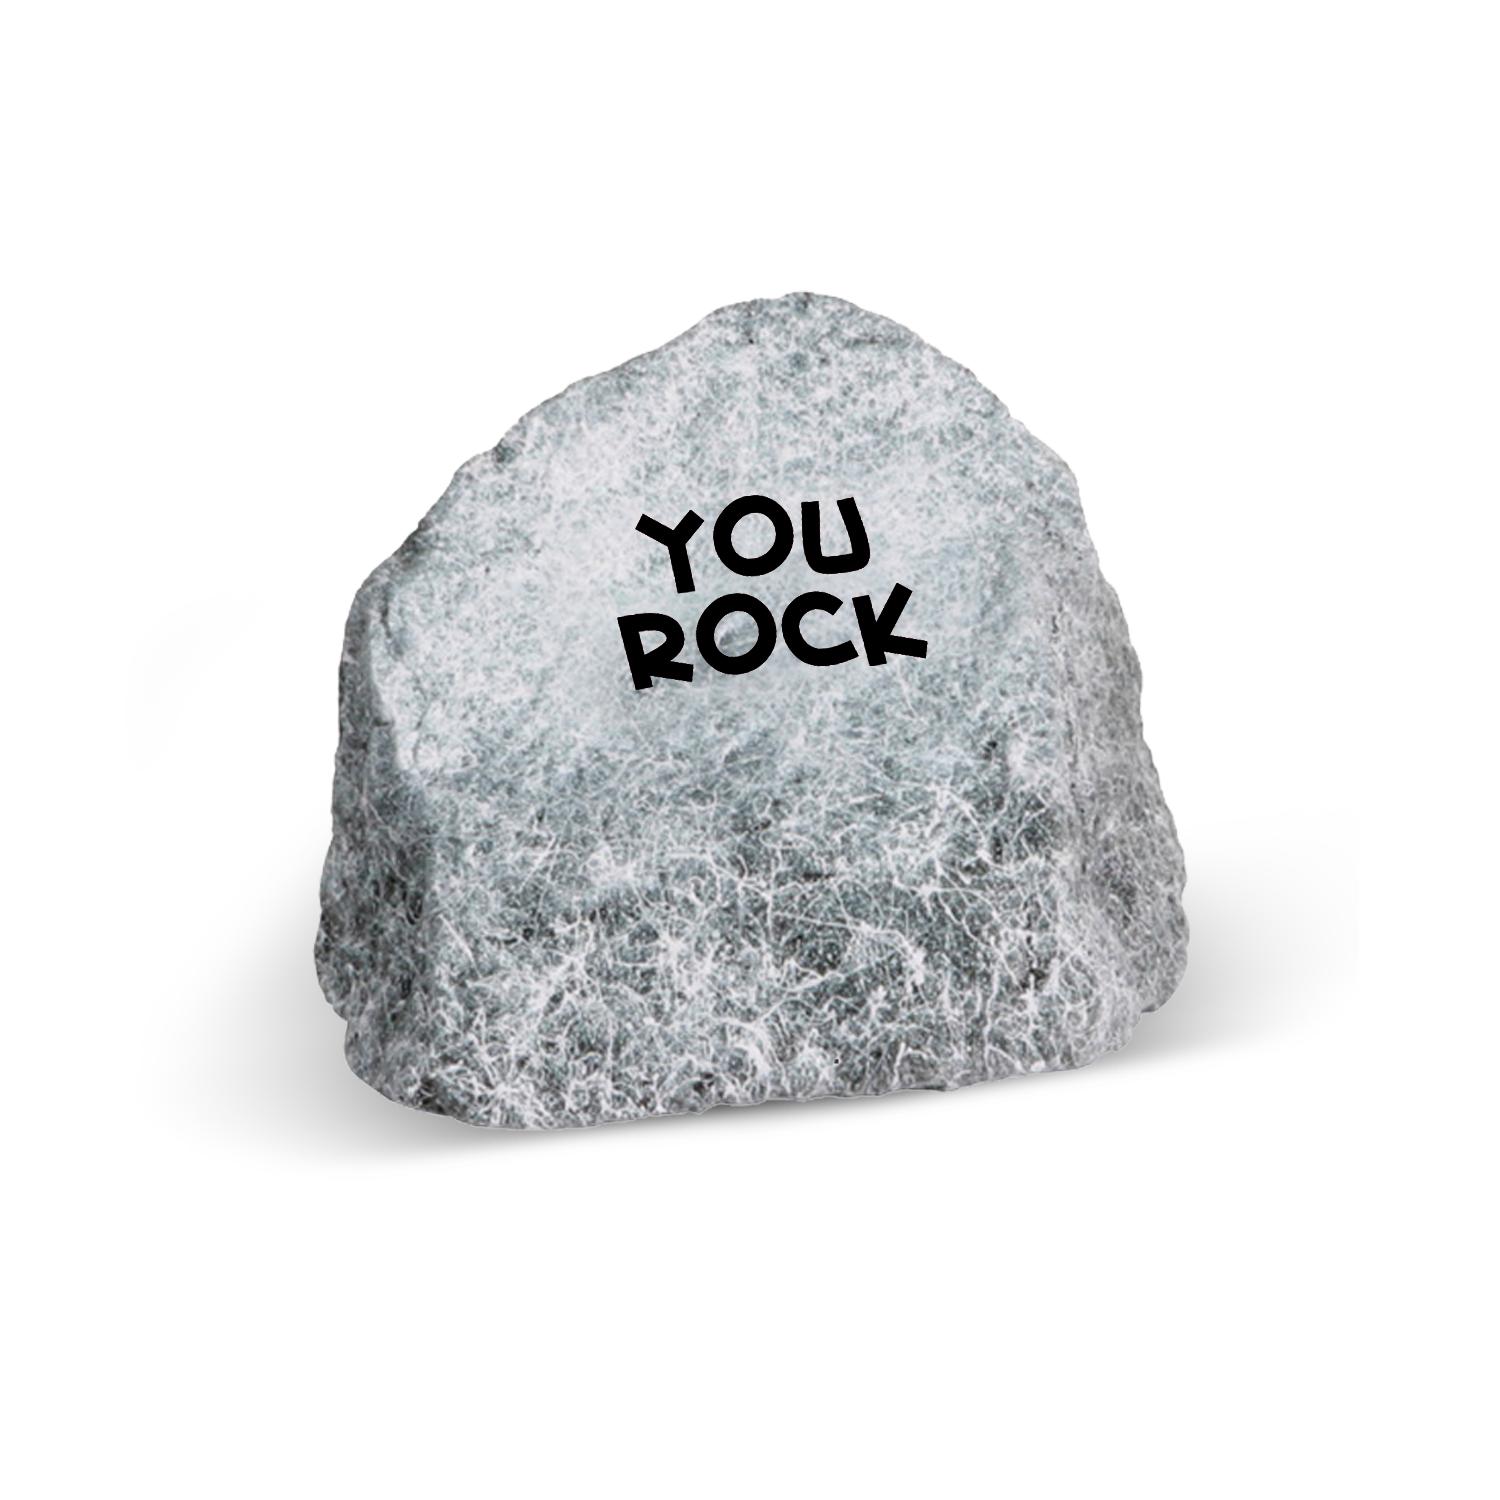 You Rock Stress Relievers   Squeezable Rock Stress Reliever Gift